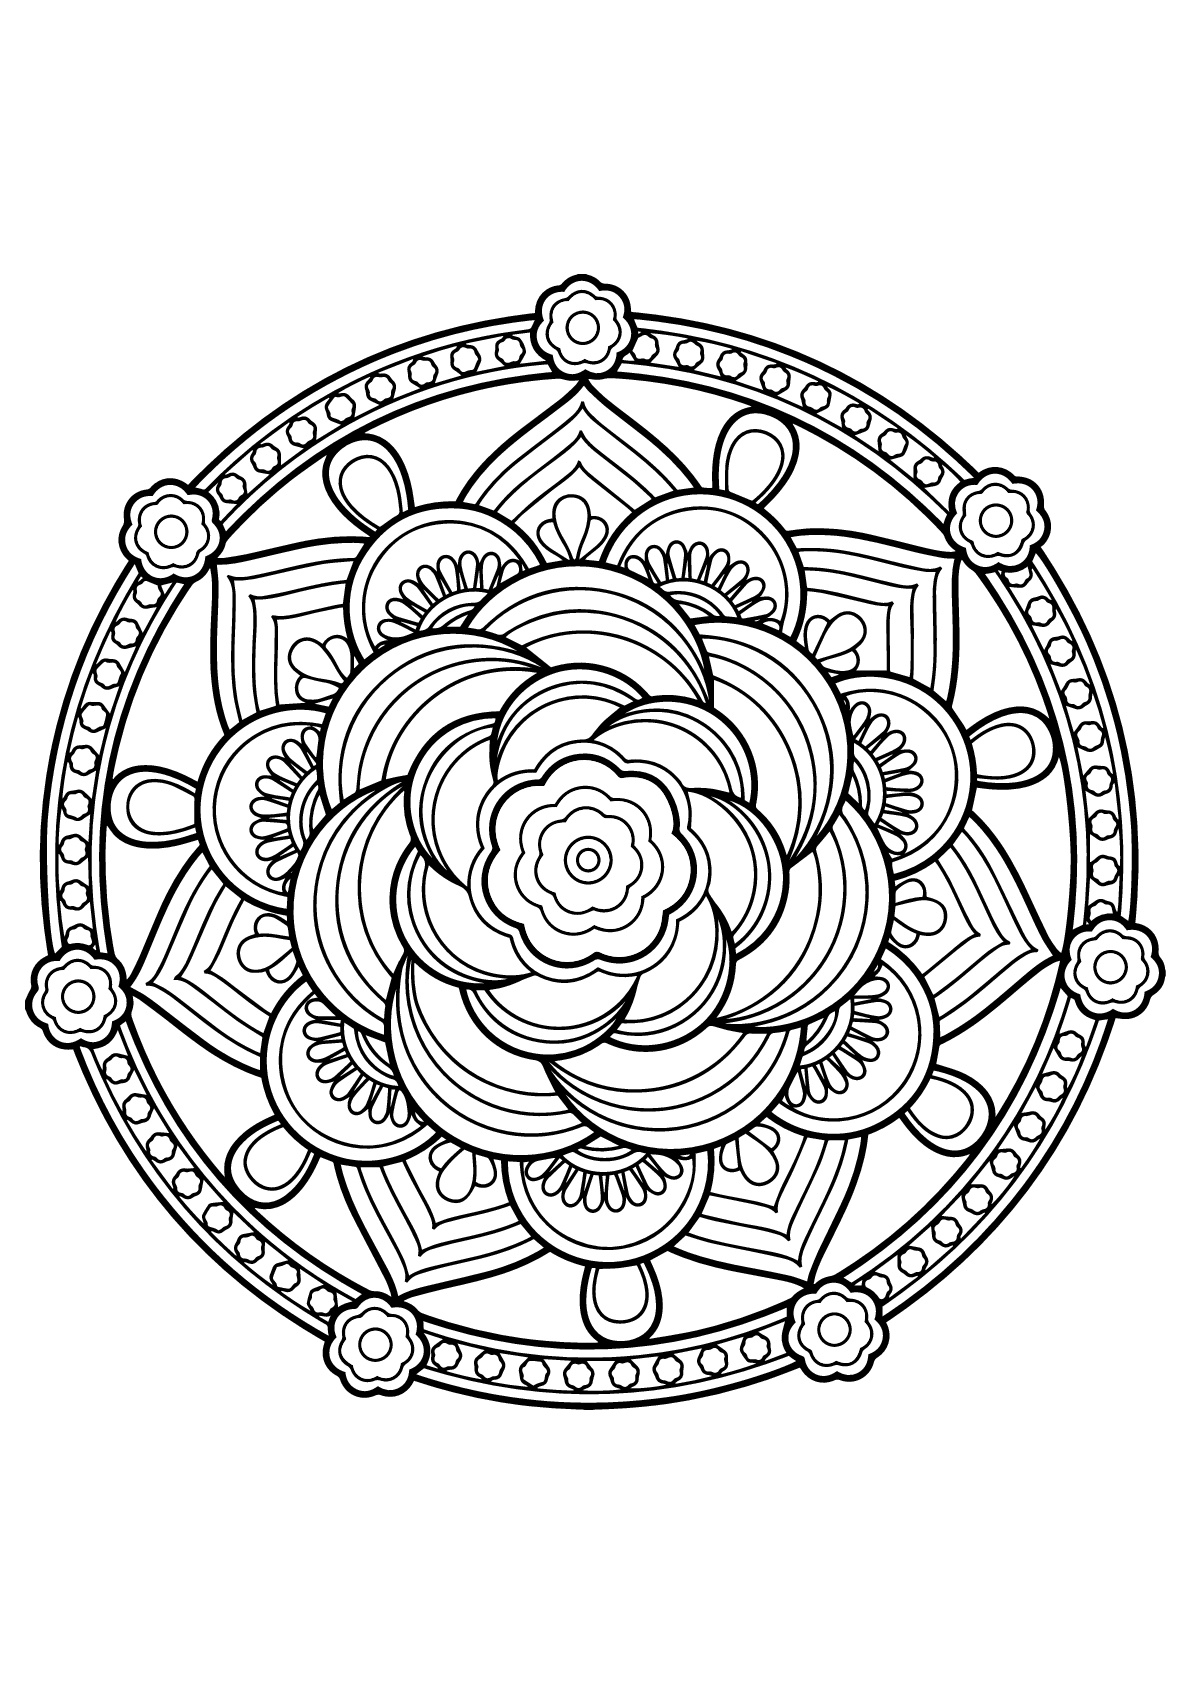 Mandala with floral patterns from Free Coloring book for adults